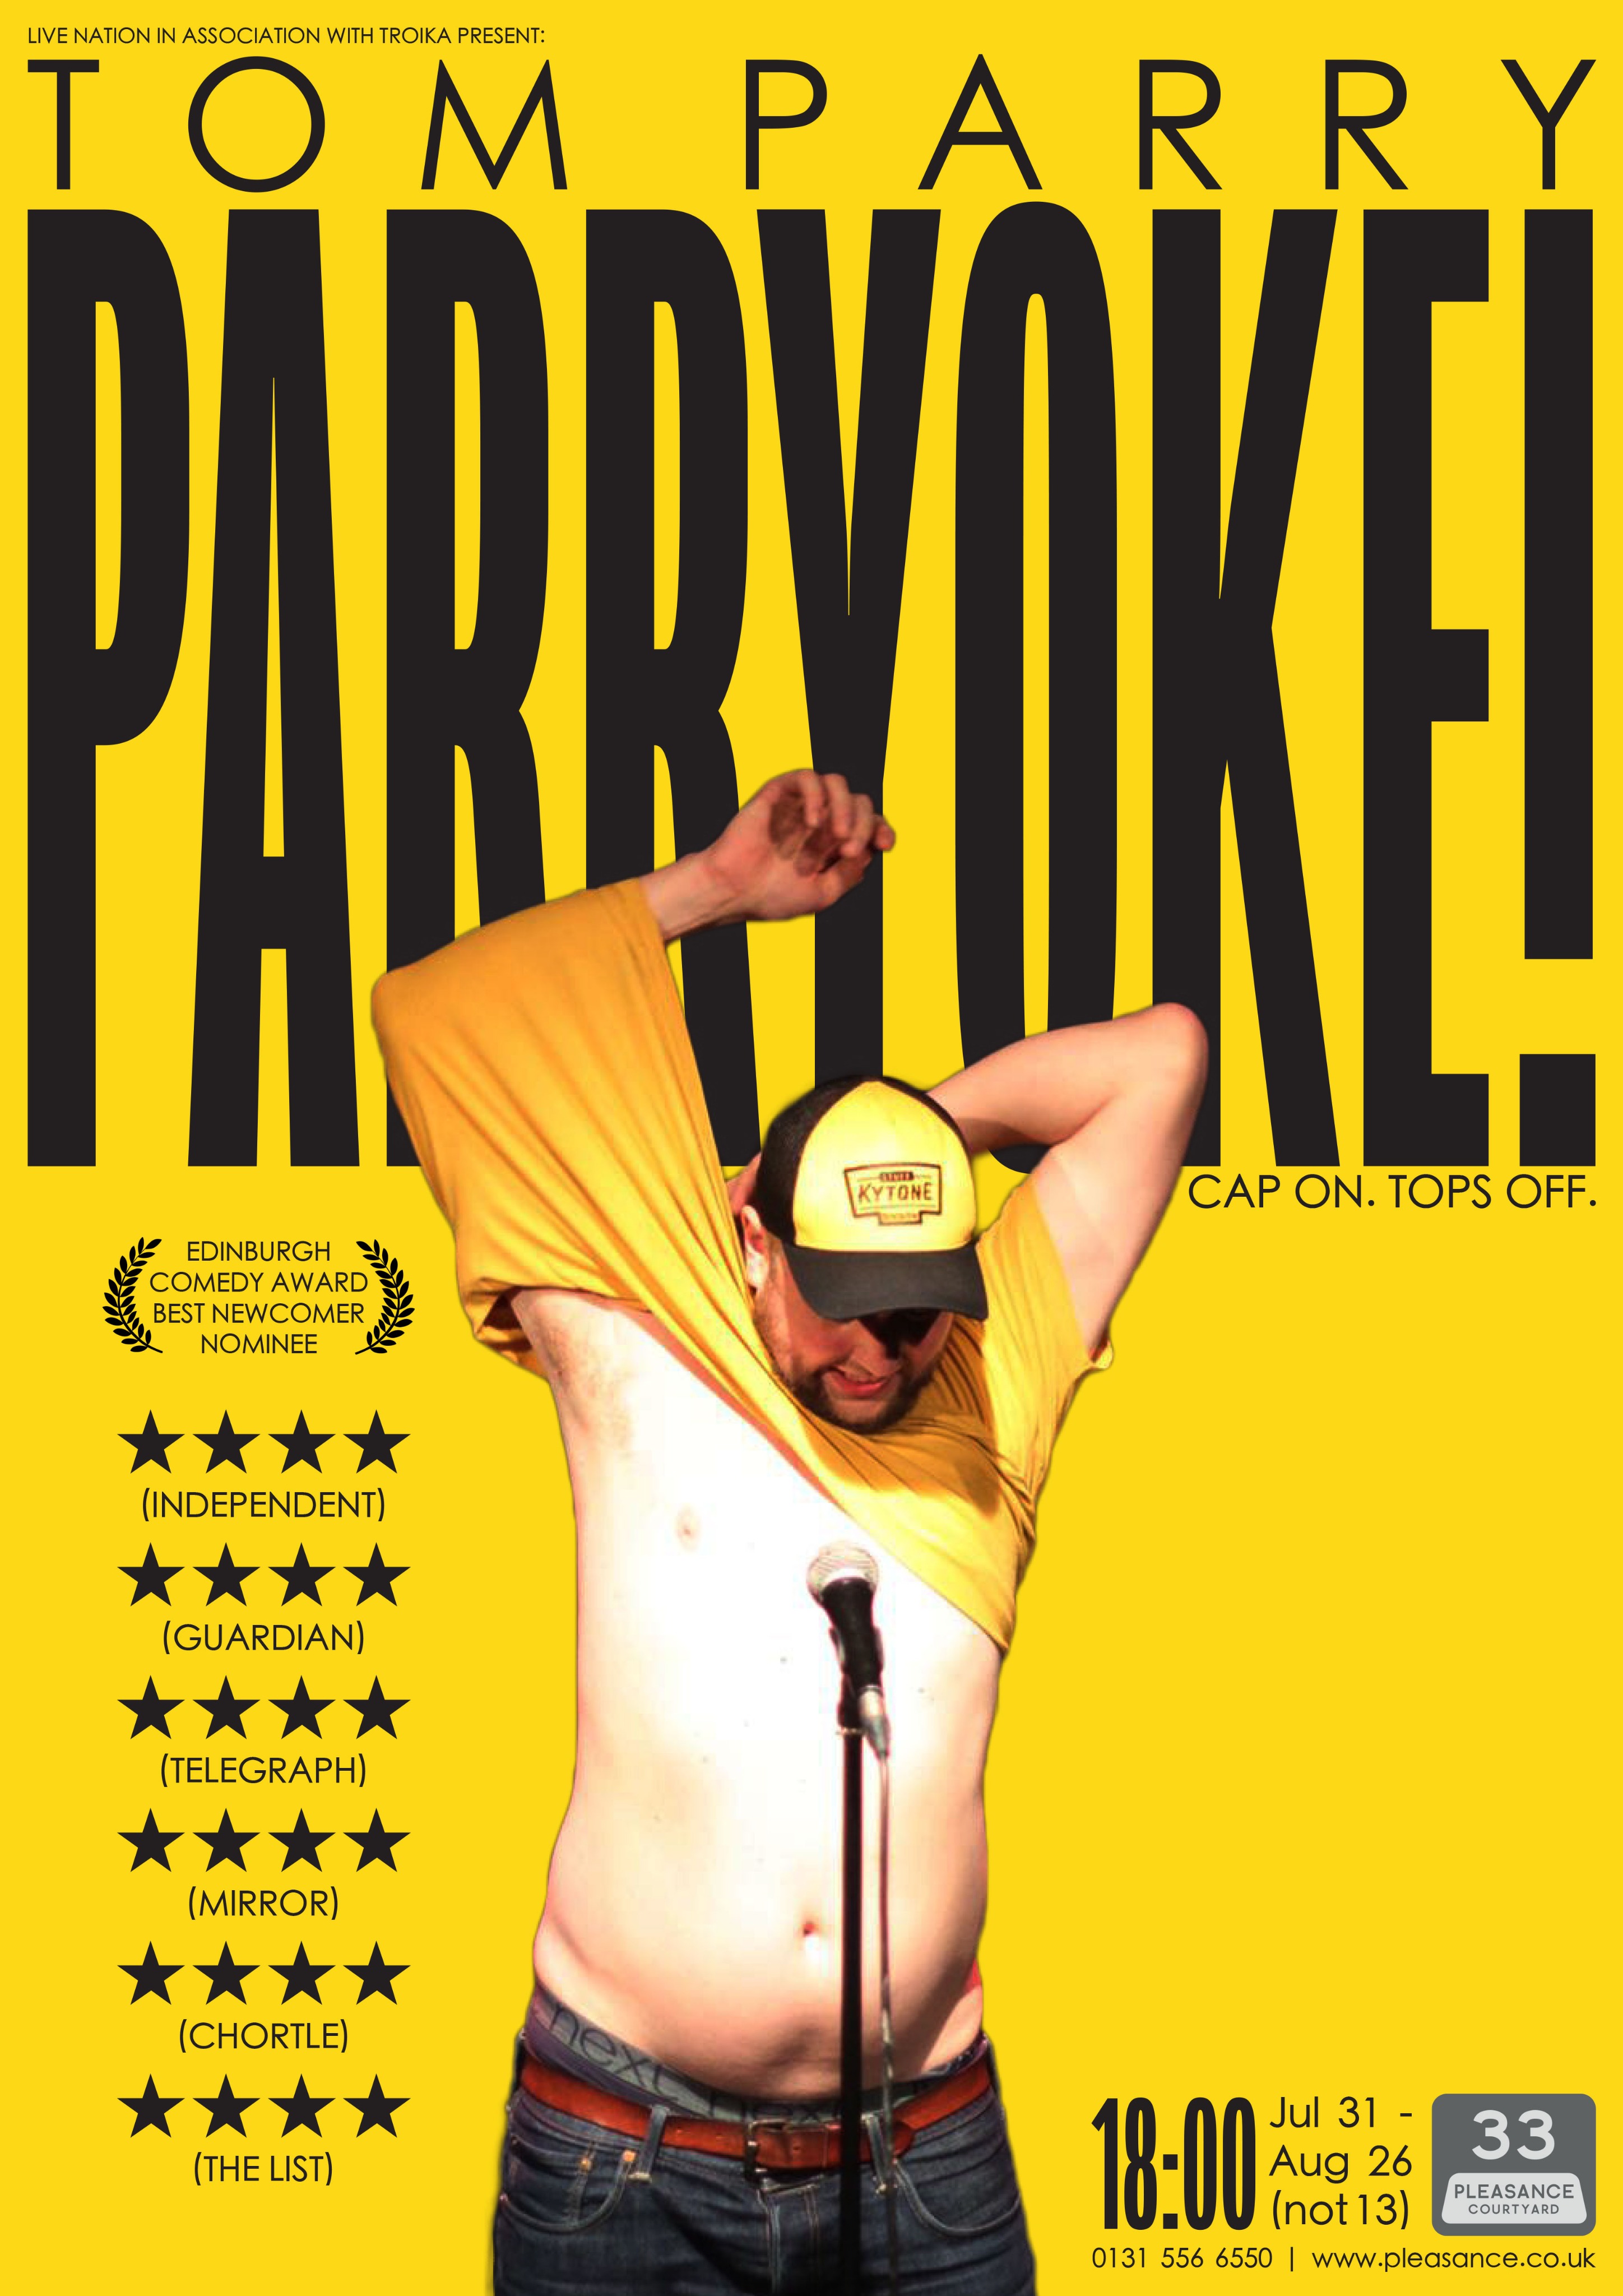 The poster for Tom Parry: Parryoke!